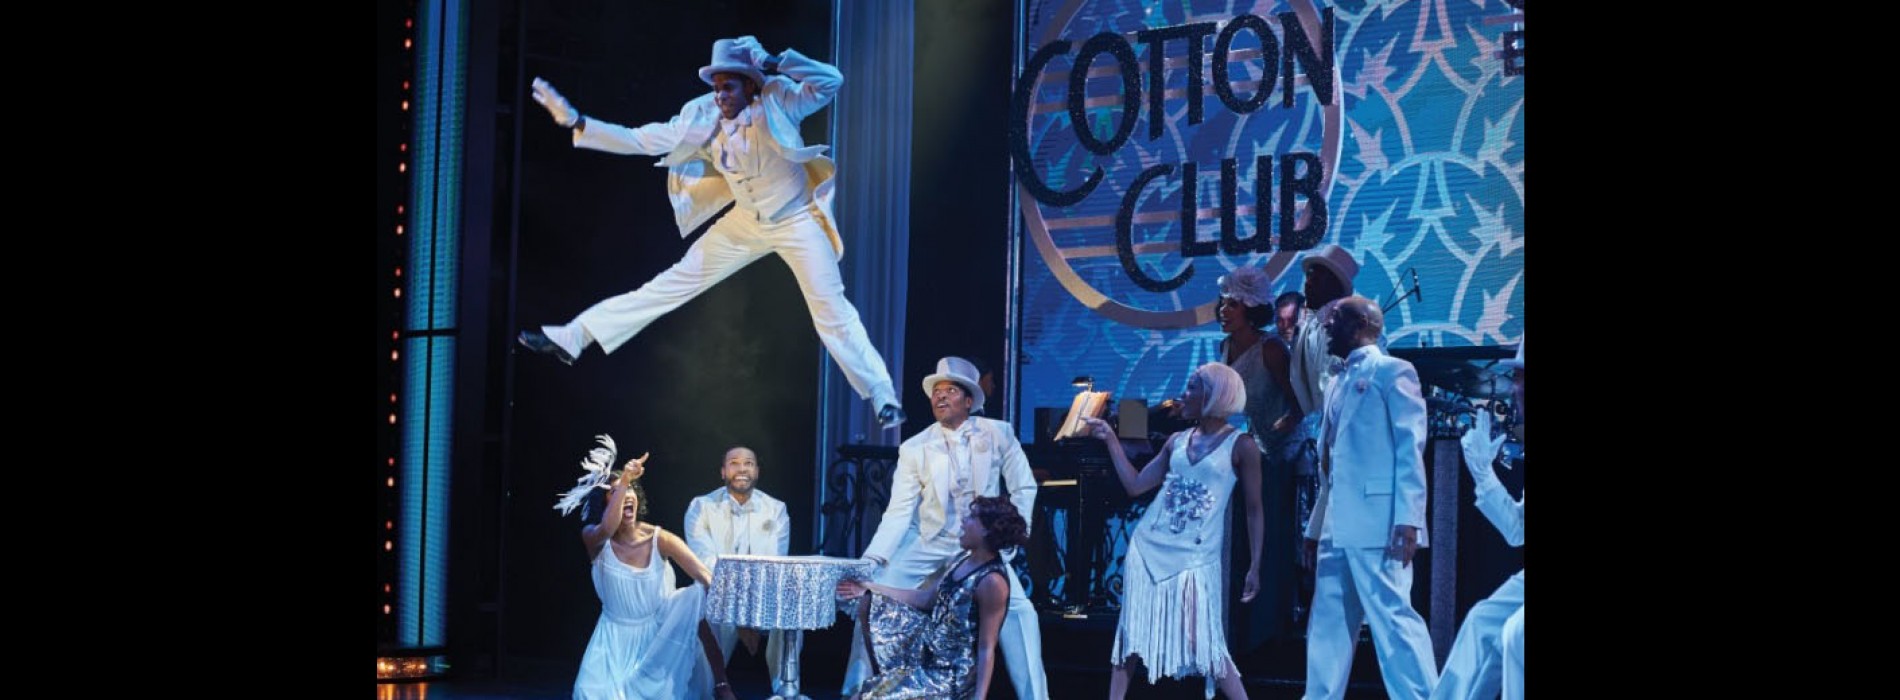 Norwegian Escape cruise lights up the stage with Broadway stars